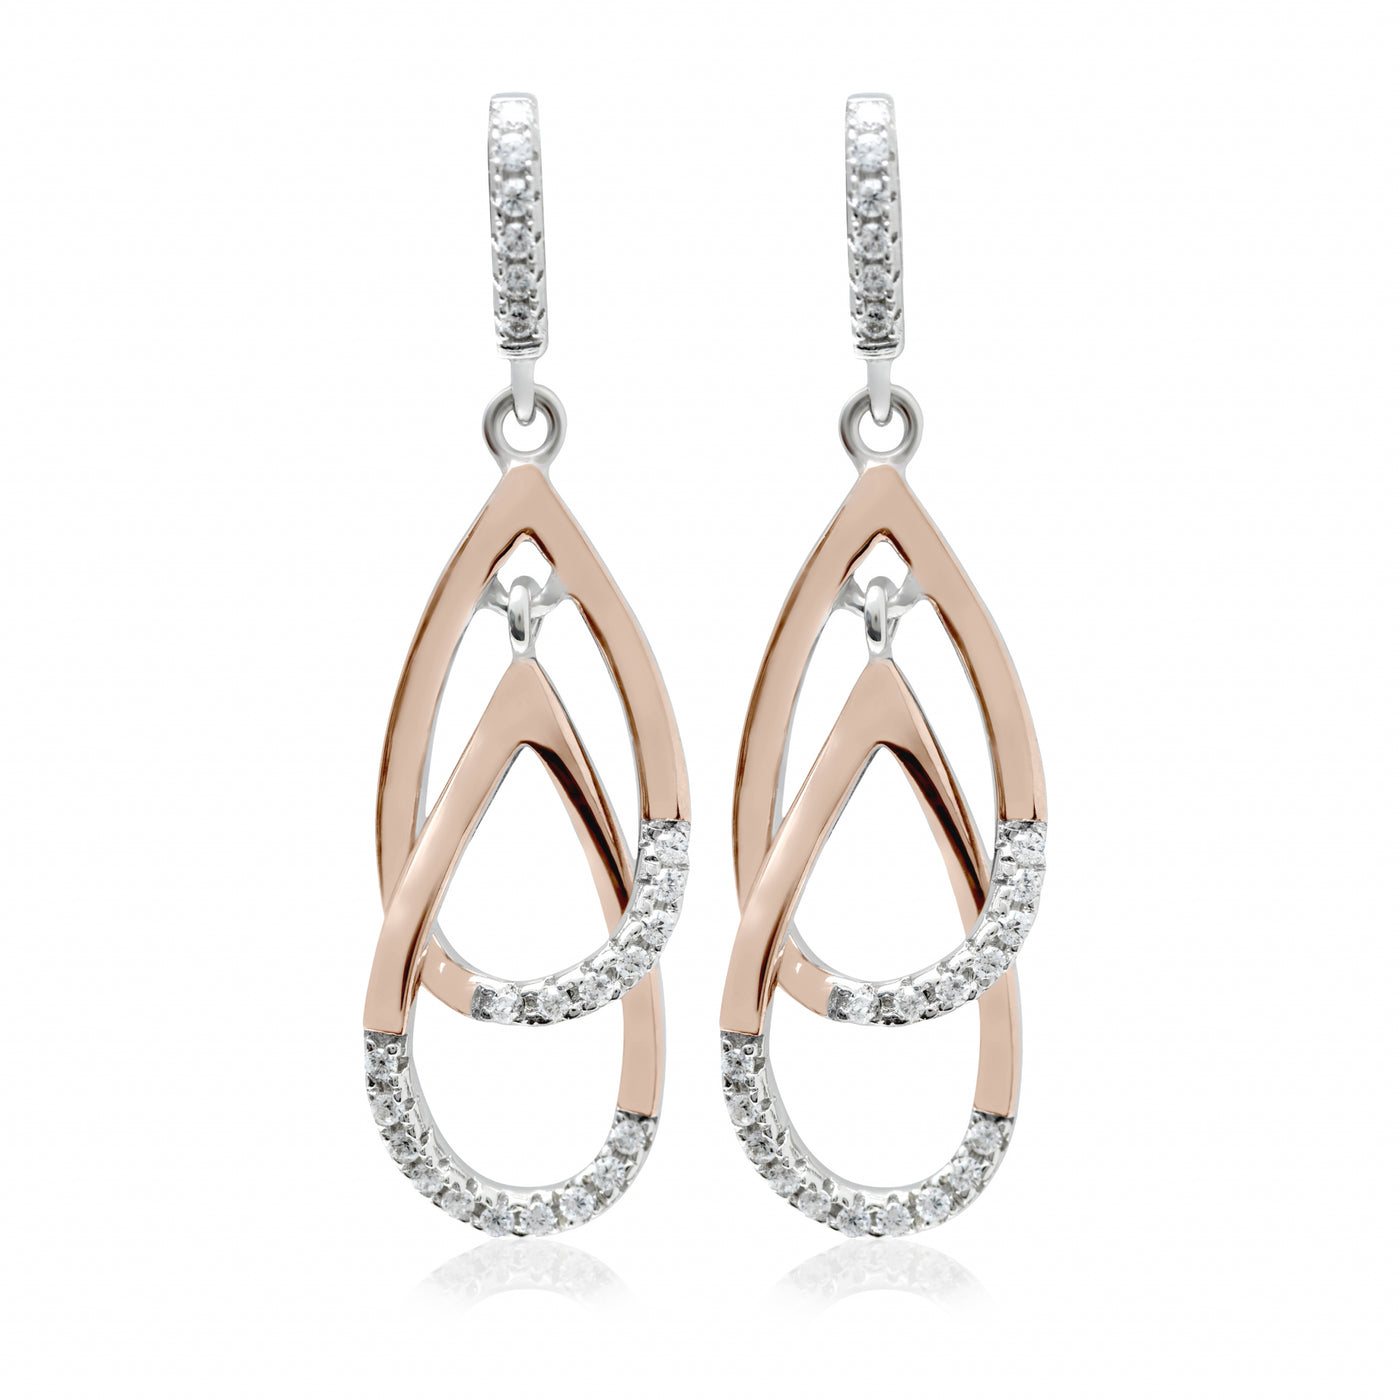 Joint of life - Earrings